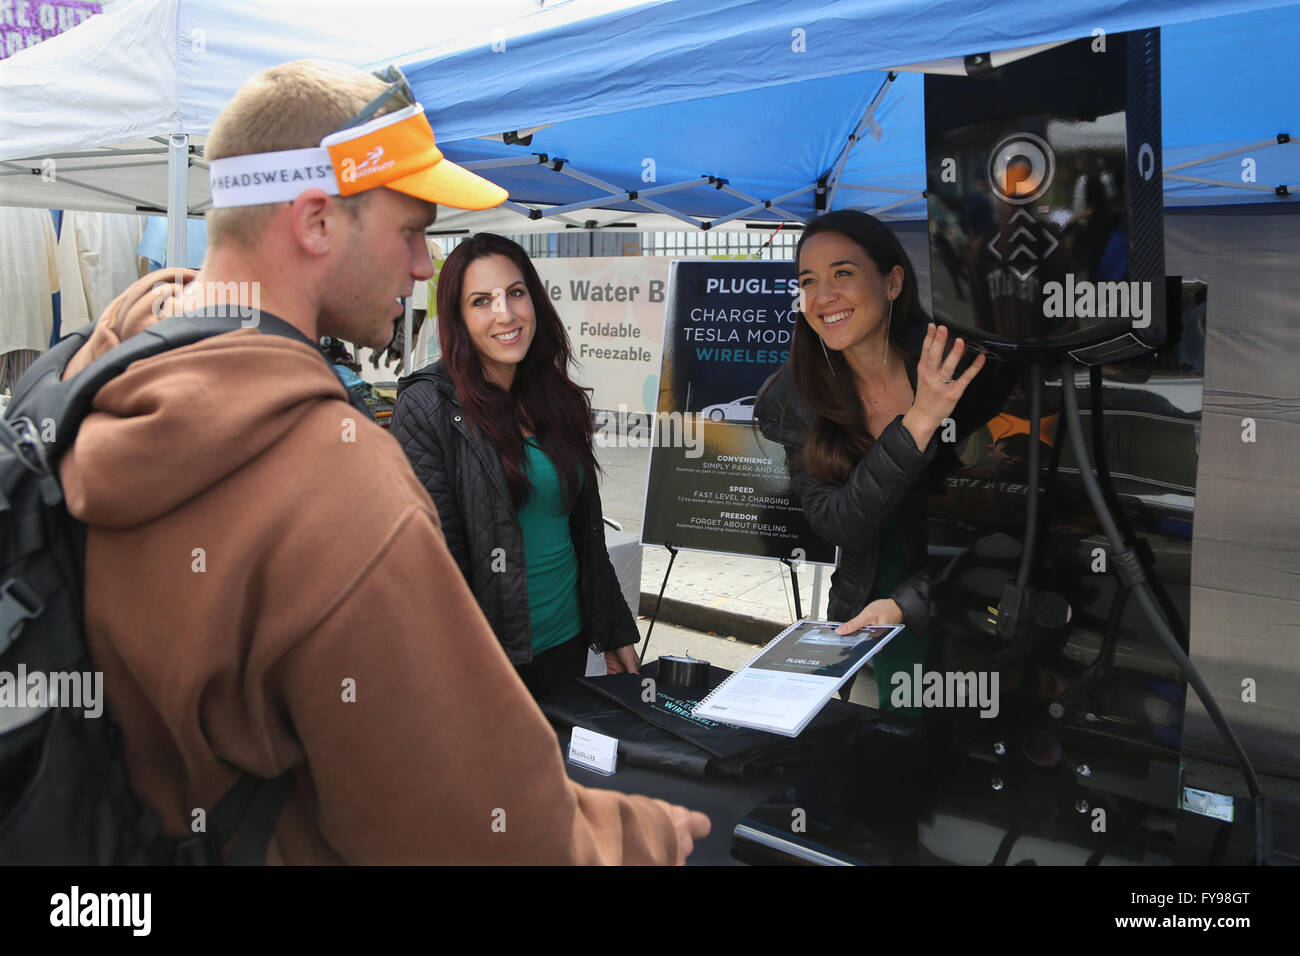 San Francisco, USA. 23rd Apr, 2016. An Earth Day event worker (R) educates an visitor about charging systems for electric vehicles in downtown San Francisco, the United States, on April 23, 2016. The annual Earth Day San Francisco Street Fest was held in San Francisco on Saturday. Environmental activists brought the public an educational and entertaining green event to help raise their ecological awareness. © Liu Yilin/Xinhua/Alamy Live News Stock Photo